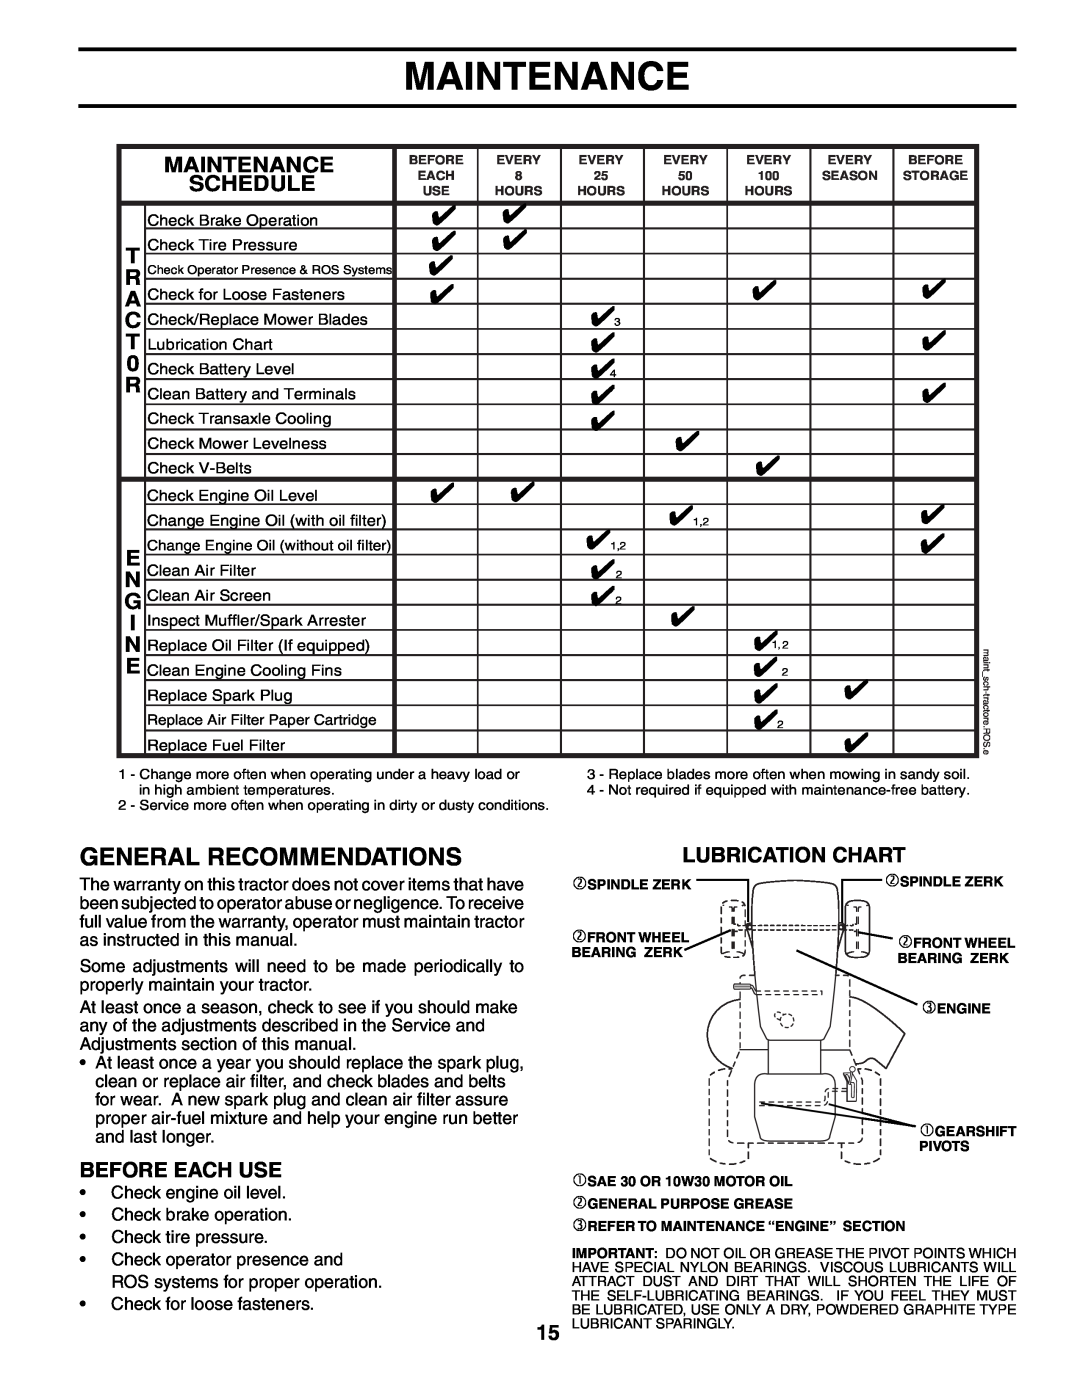 Weed Eater 96016001400, 403284 manual Maintenance, General Recommendations, Schedule, Before Each Use, Lubrication Chart 